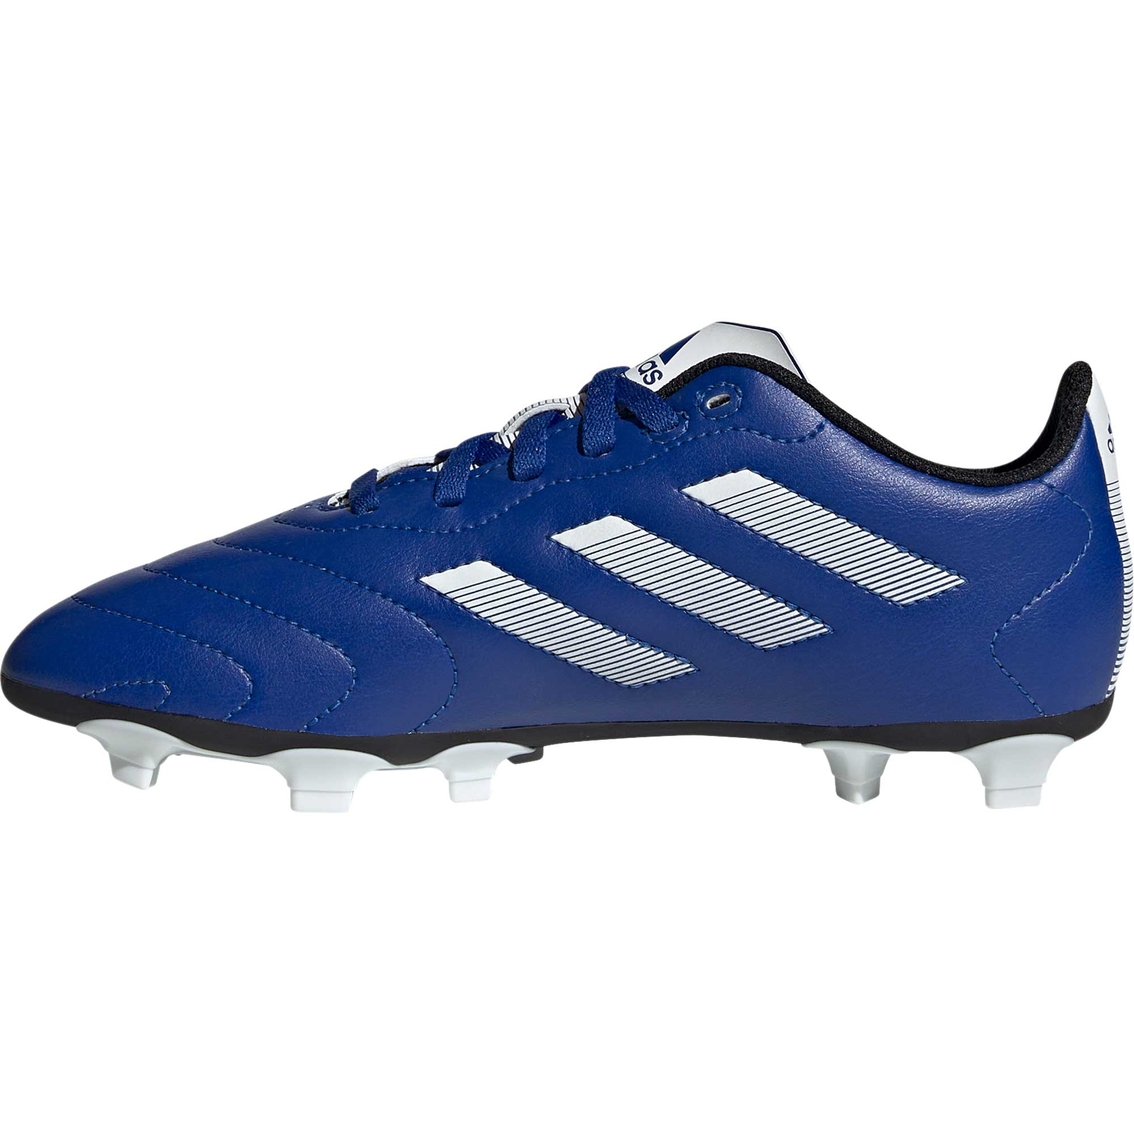 Adidas Grade School Boys Goletto VII Firm Ground Jr. Soccer Cleats - Image 3 of 7